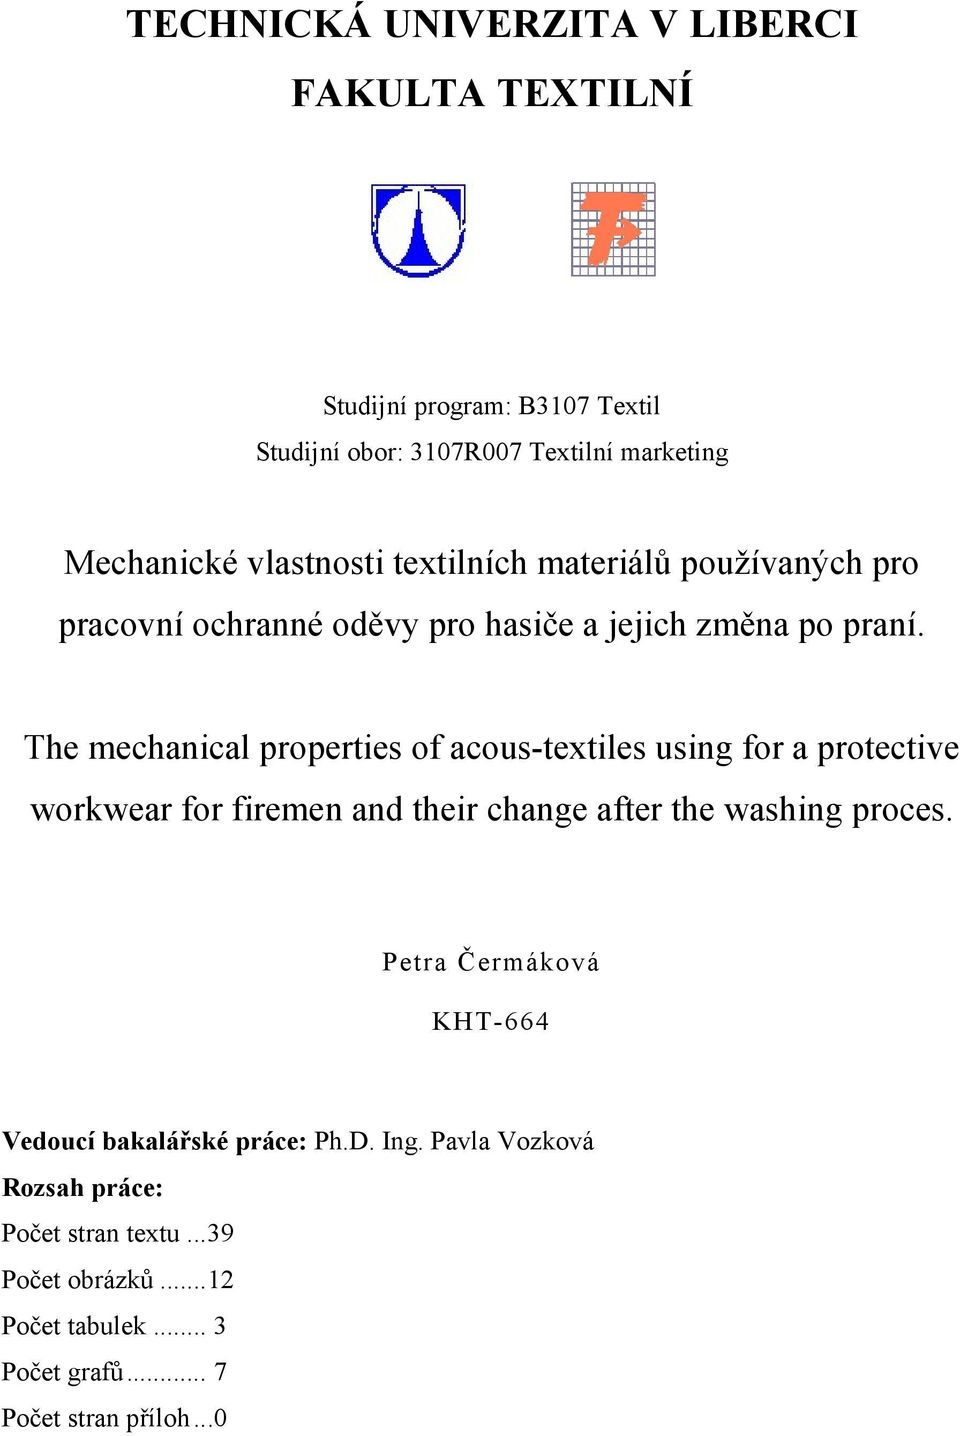 The mechanical properties of acous-textiles using for a protective workwear for firemen and their change after the washing proces.